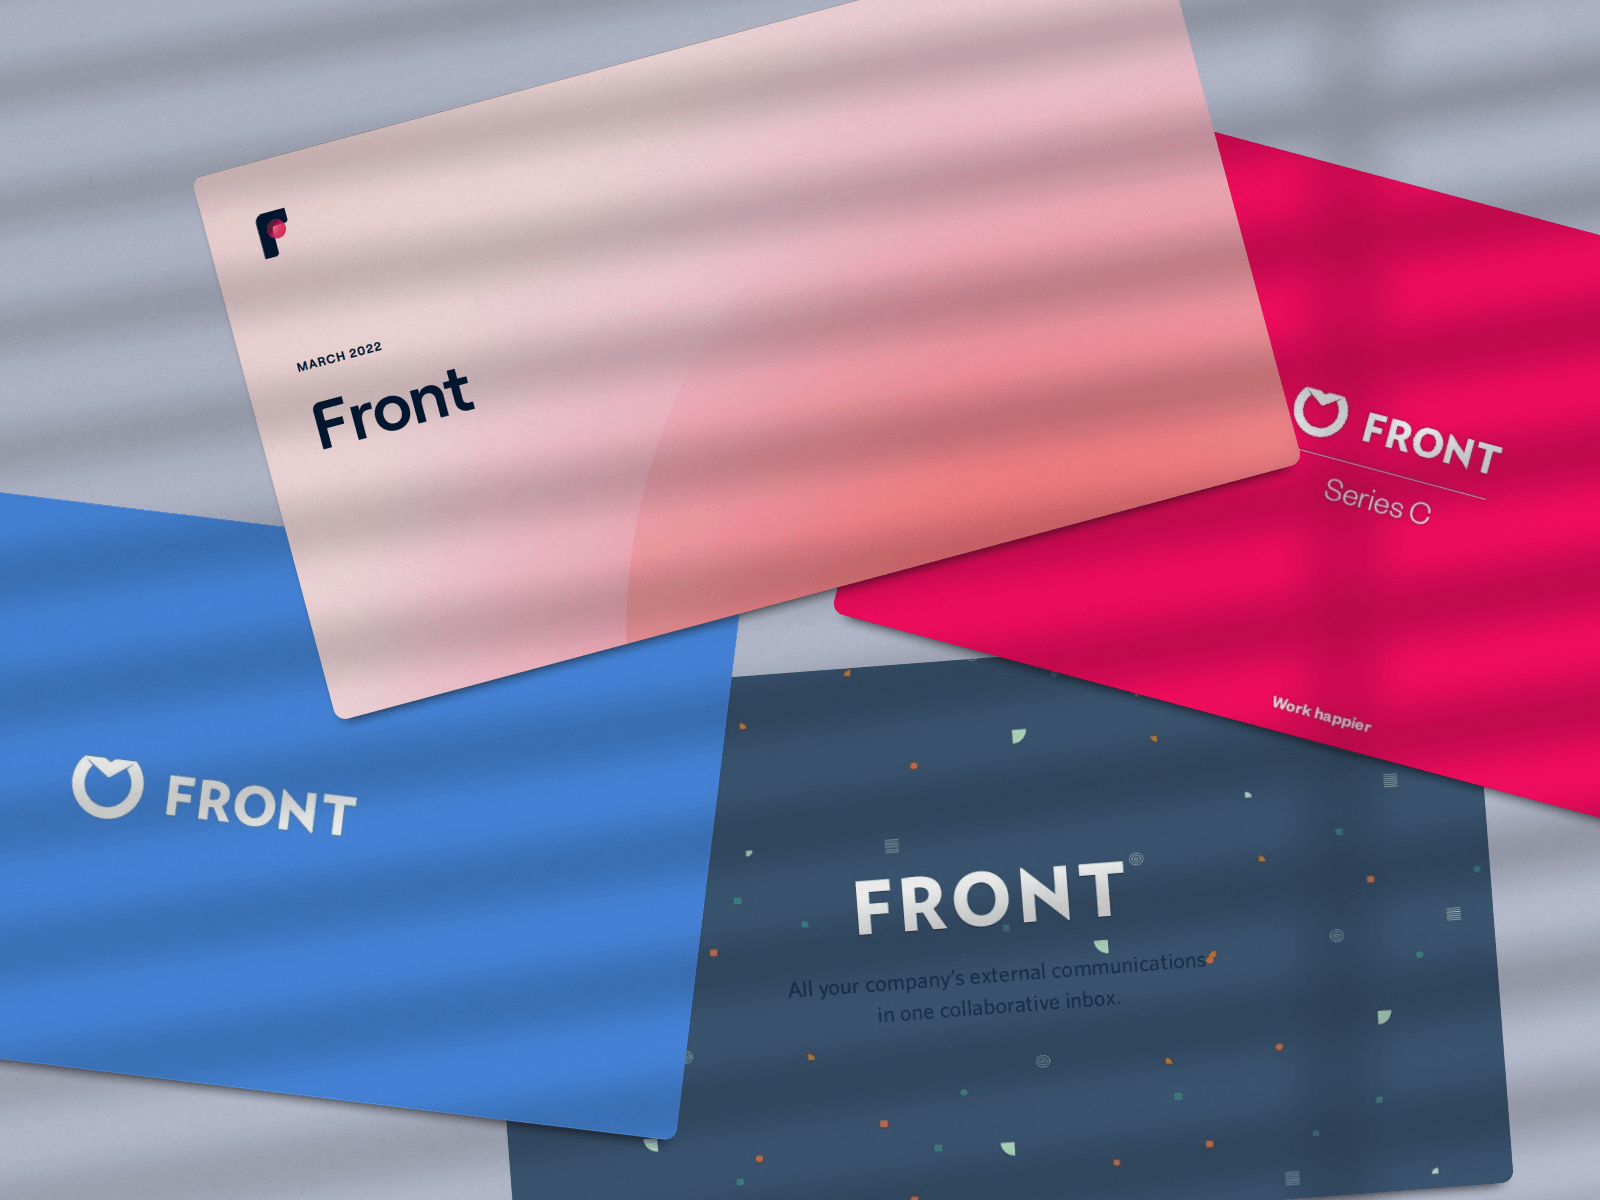 All of Front’s Pitch Decks